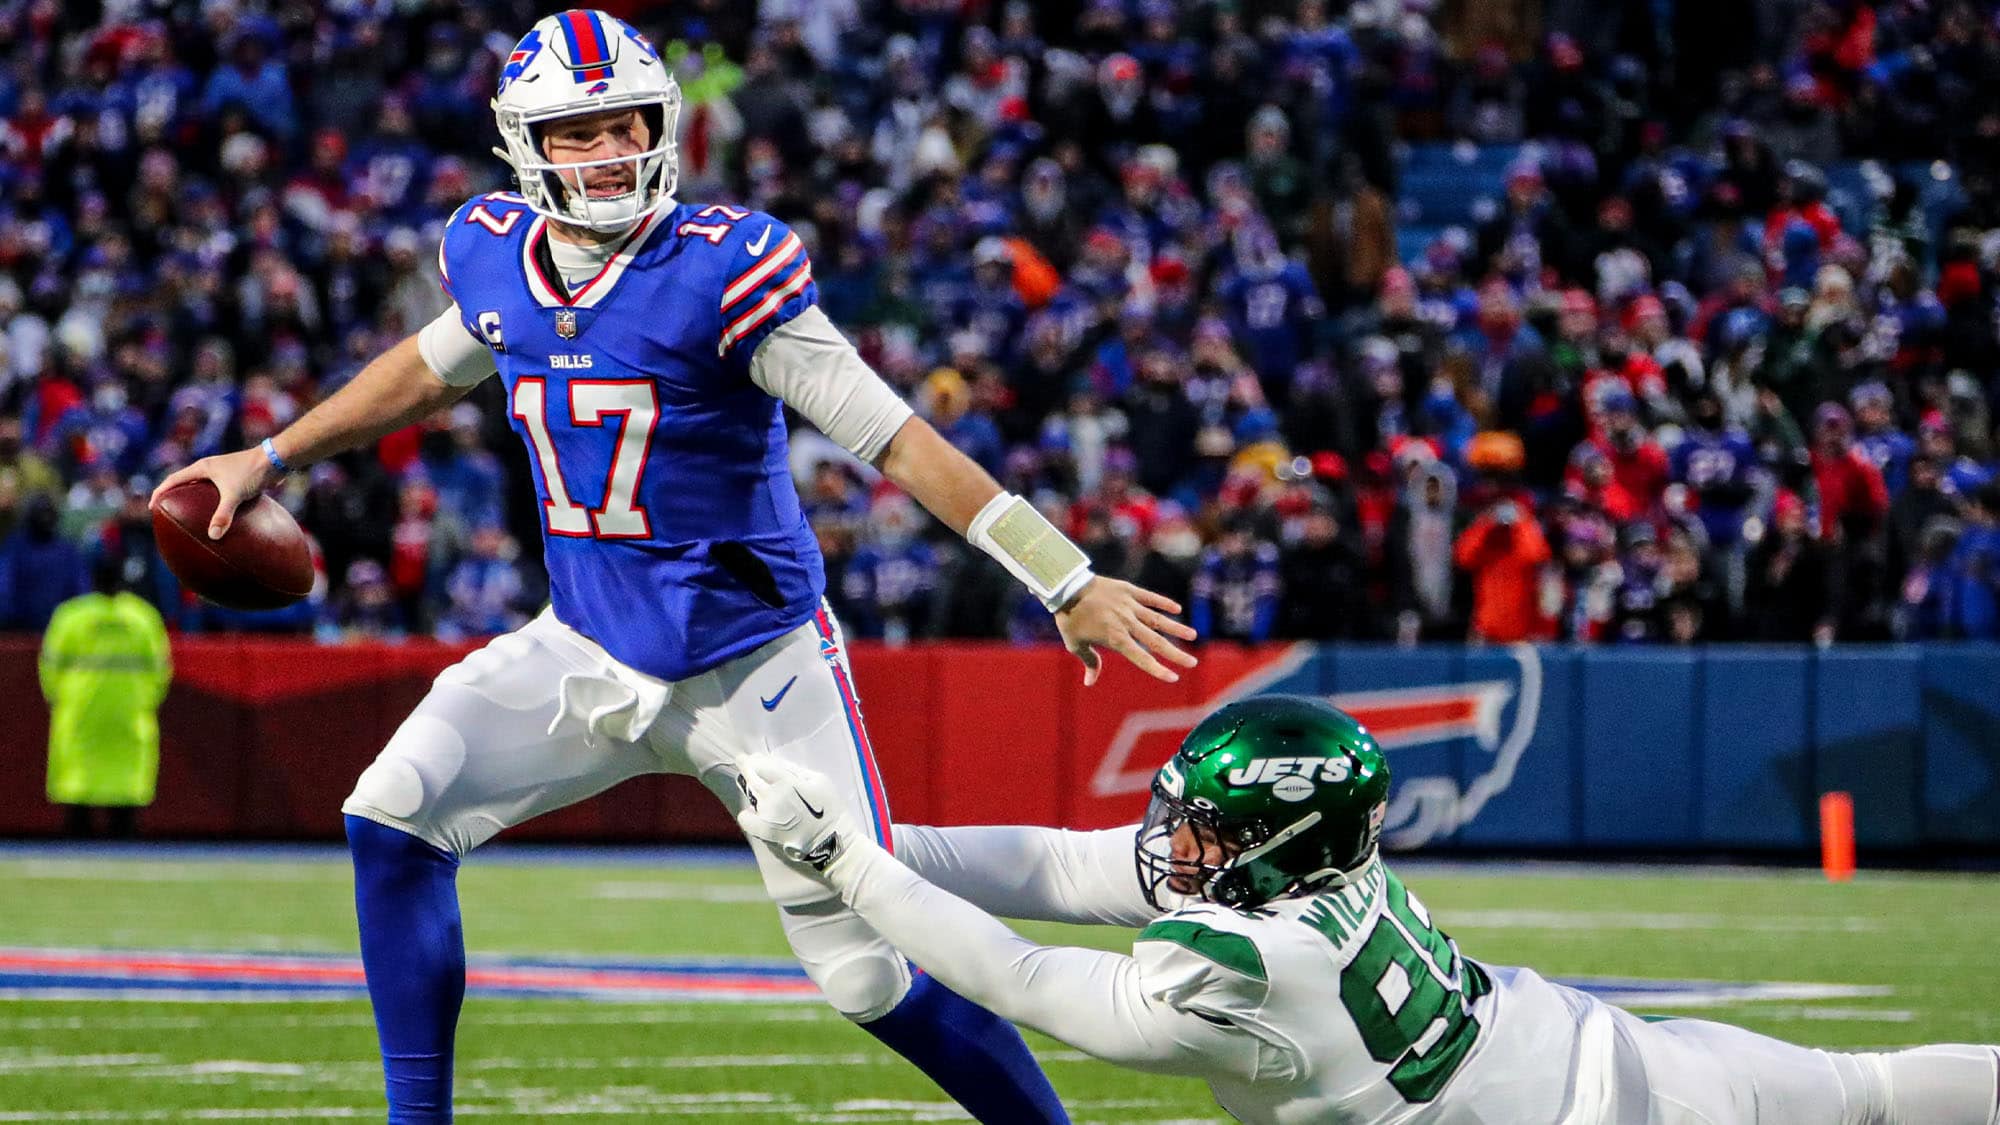 NY Jets-Bills game not flexed - but not for the reason you think